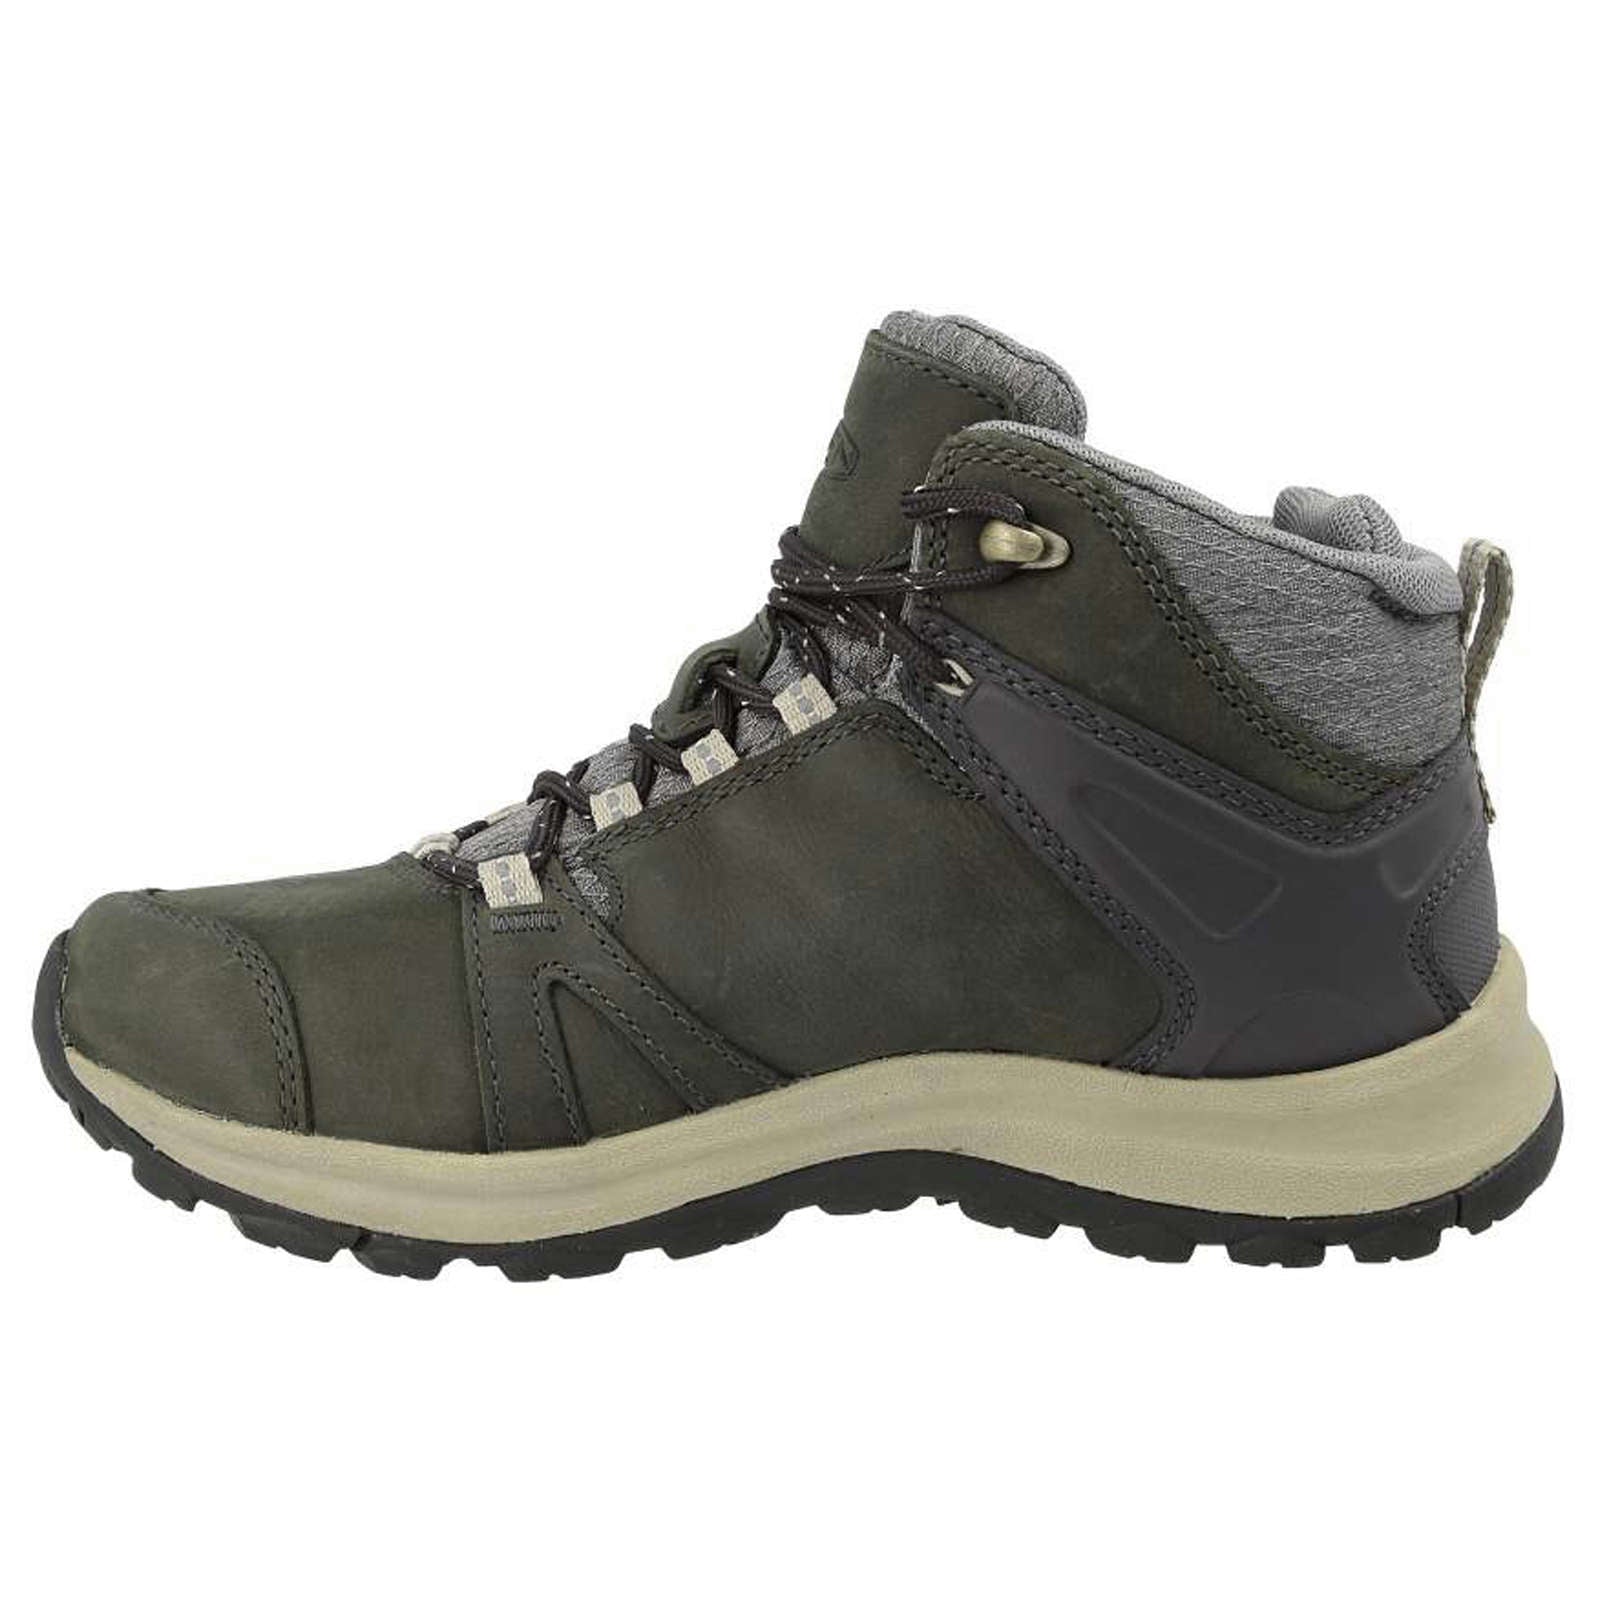 Keen Terradora II Mid Waterproof Leather Women's Hiking Boots#color_magnet plaza taupe